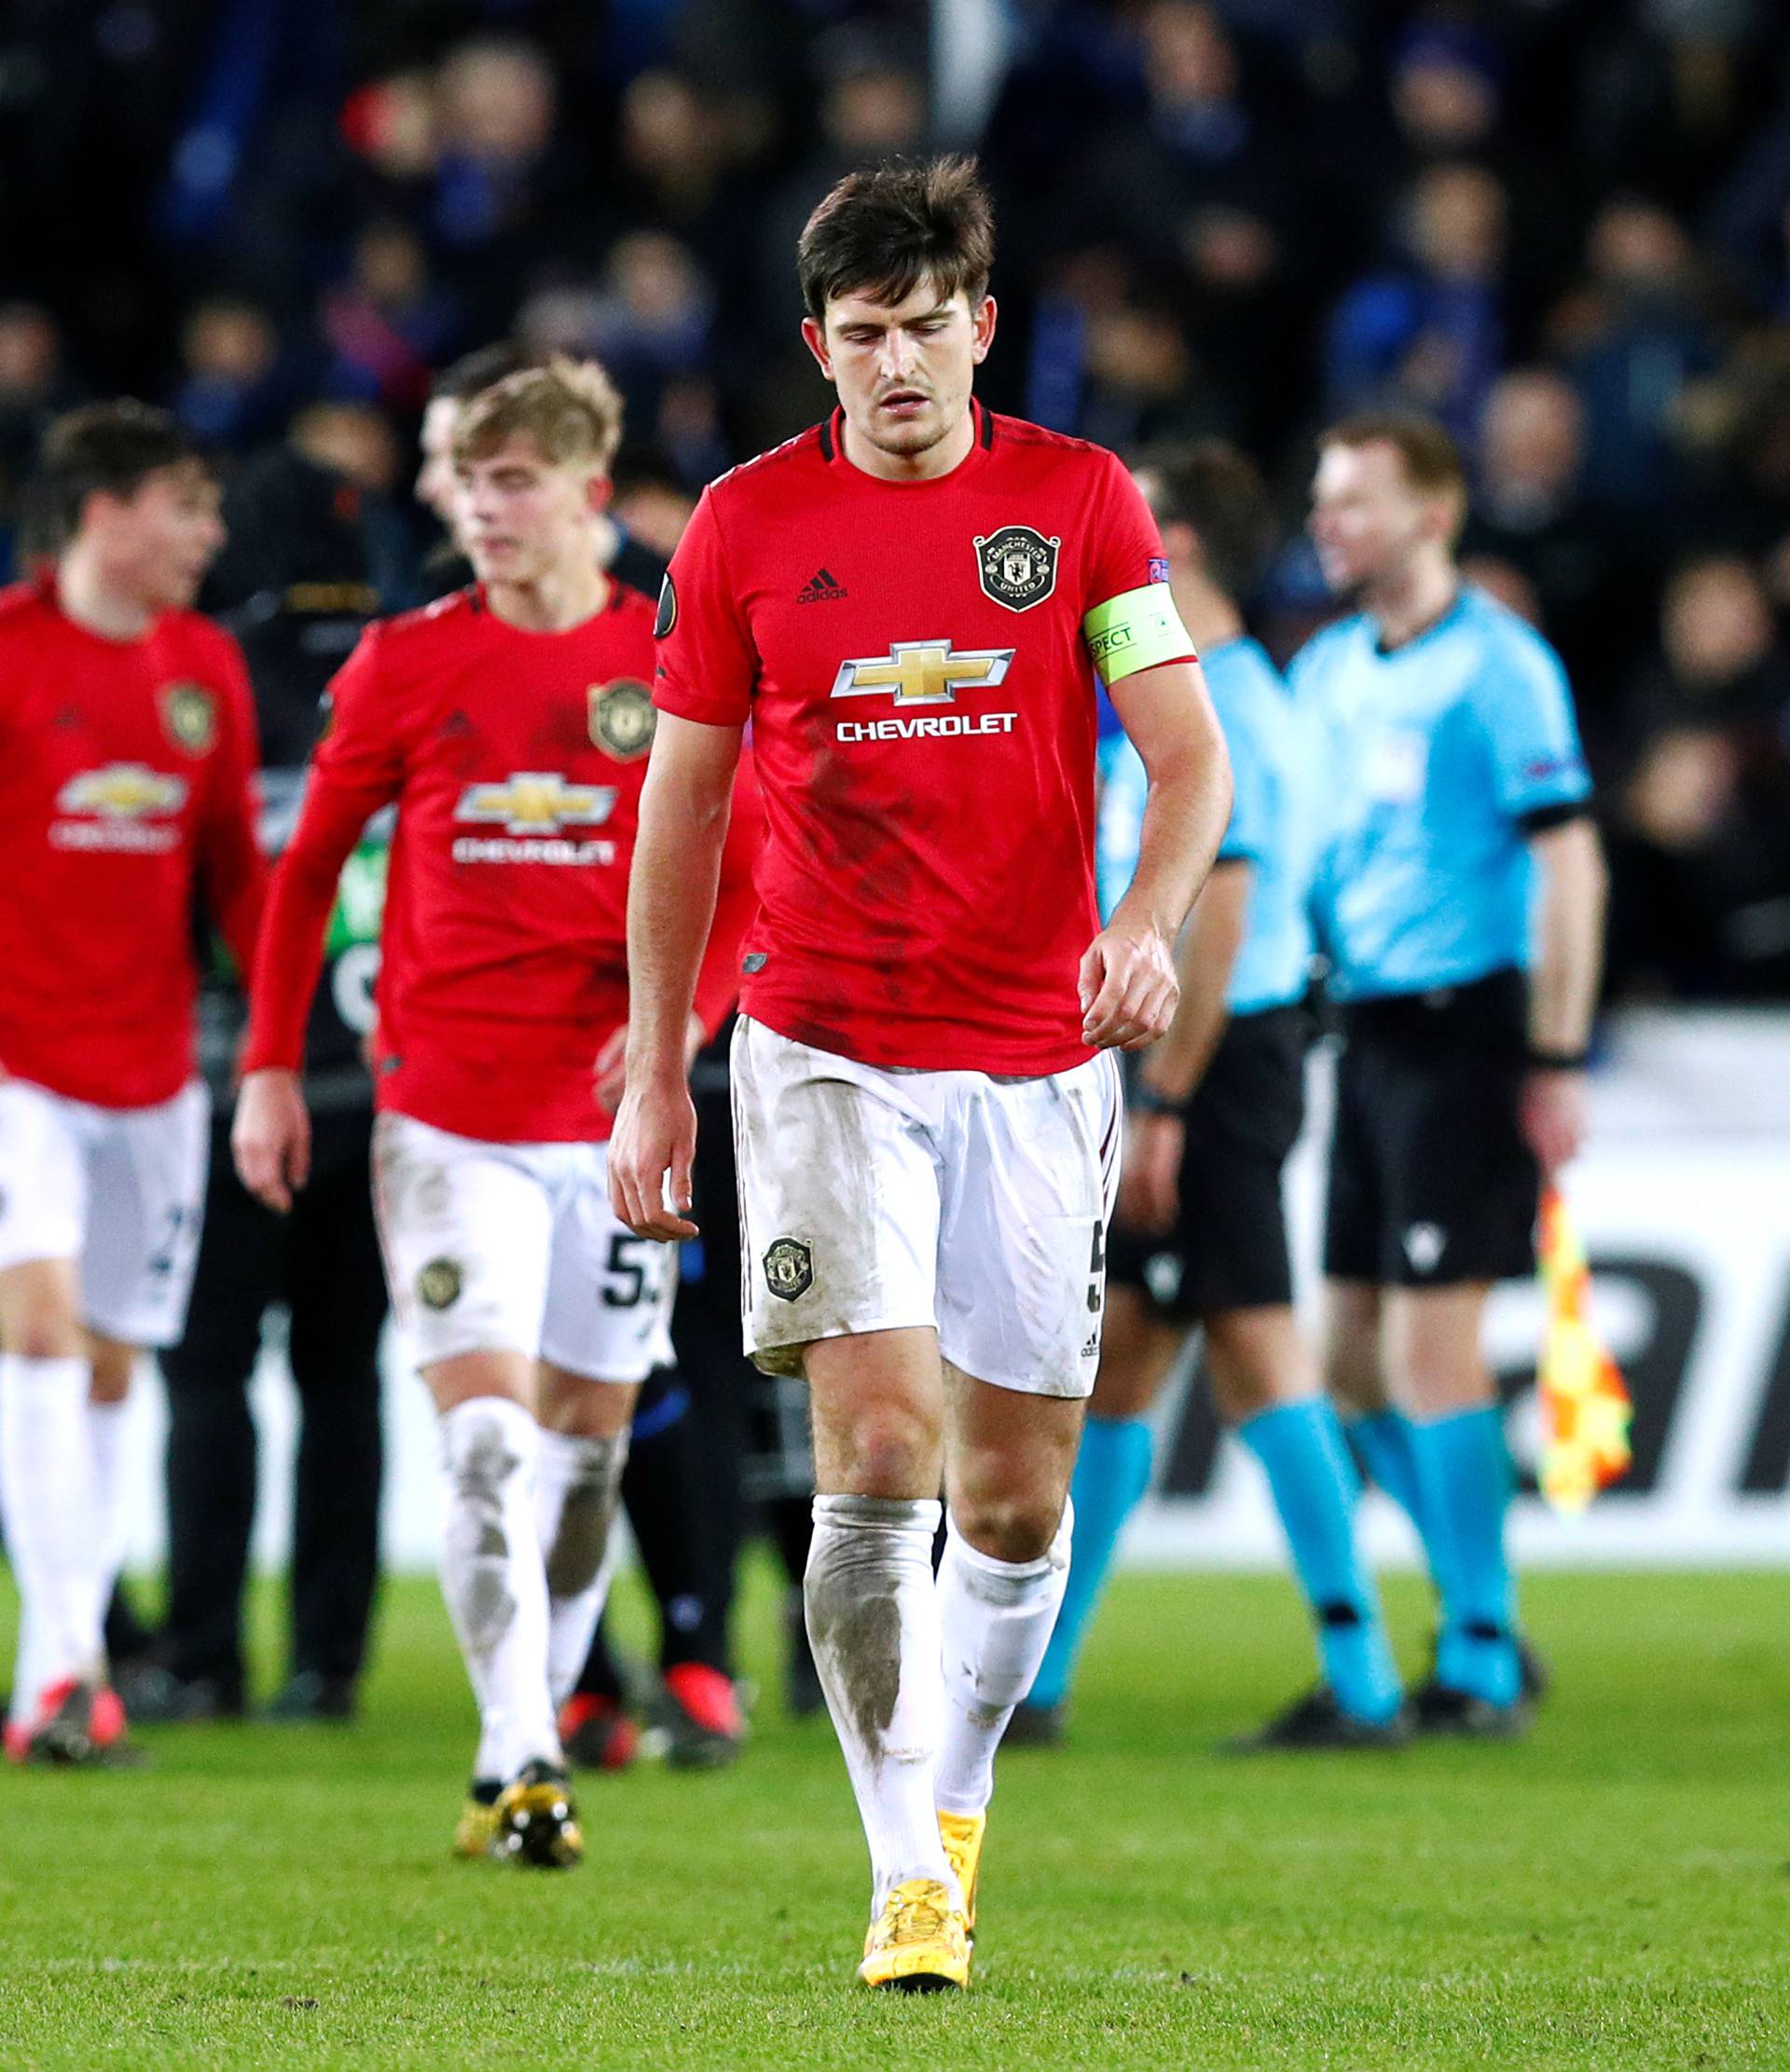 Europa League - Round of 32 First Leg - Club Brugge v Manchester United